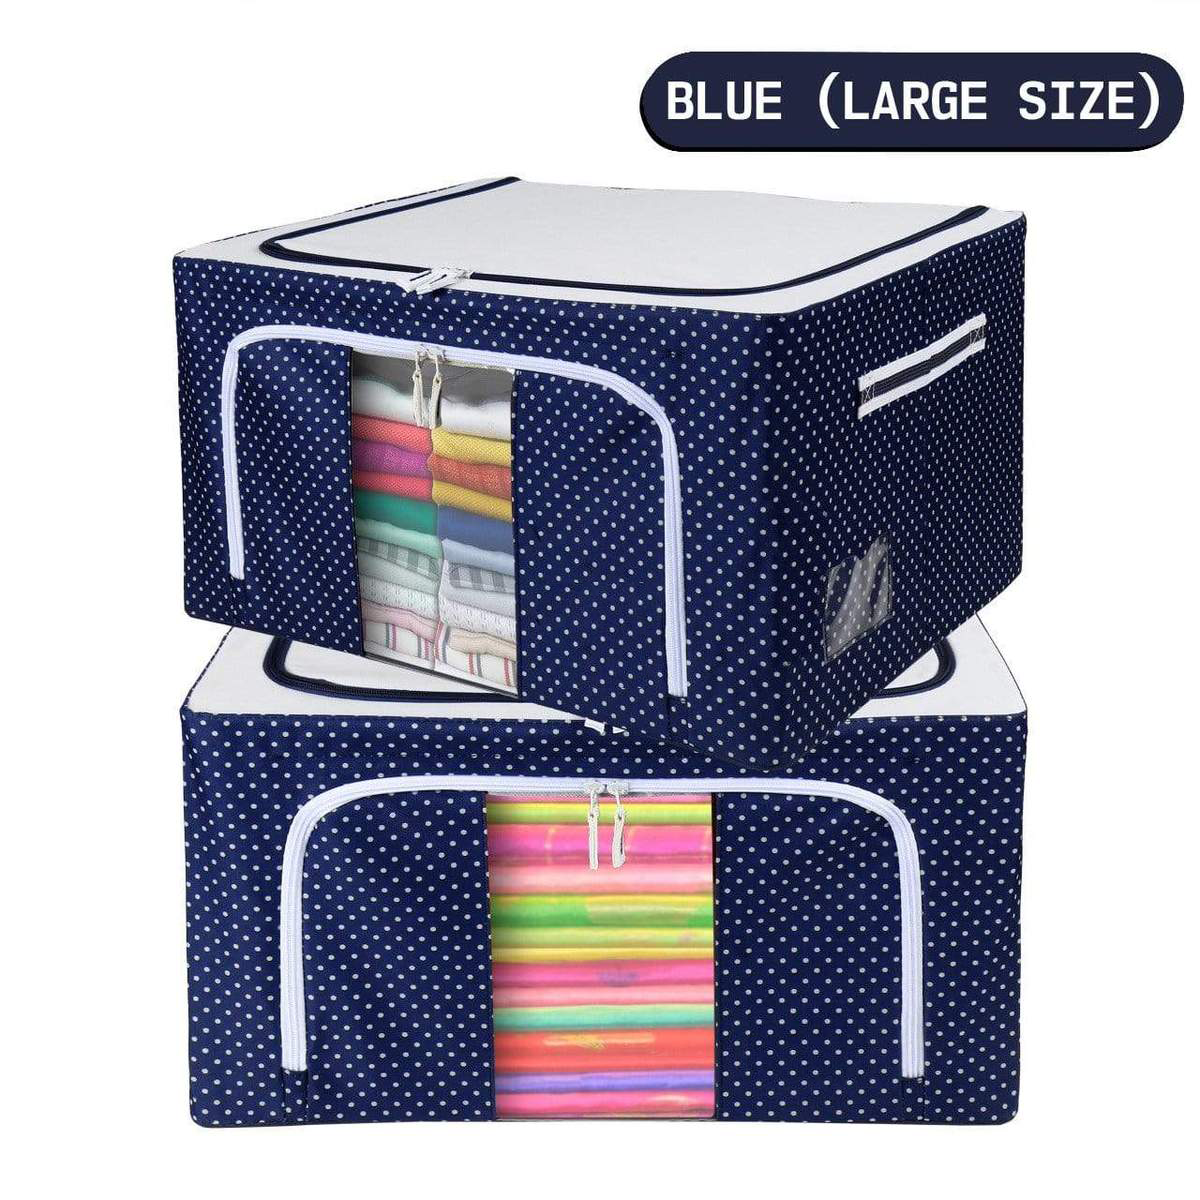 Oxford Fabric Storage Boxes For Clothes, Sarees, Bed Sheets, Blanket Etc (Large)